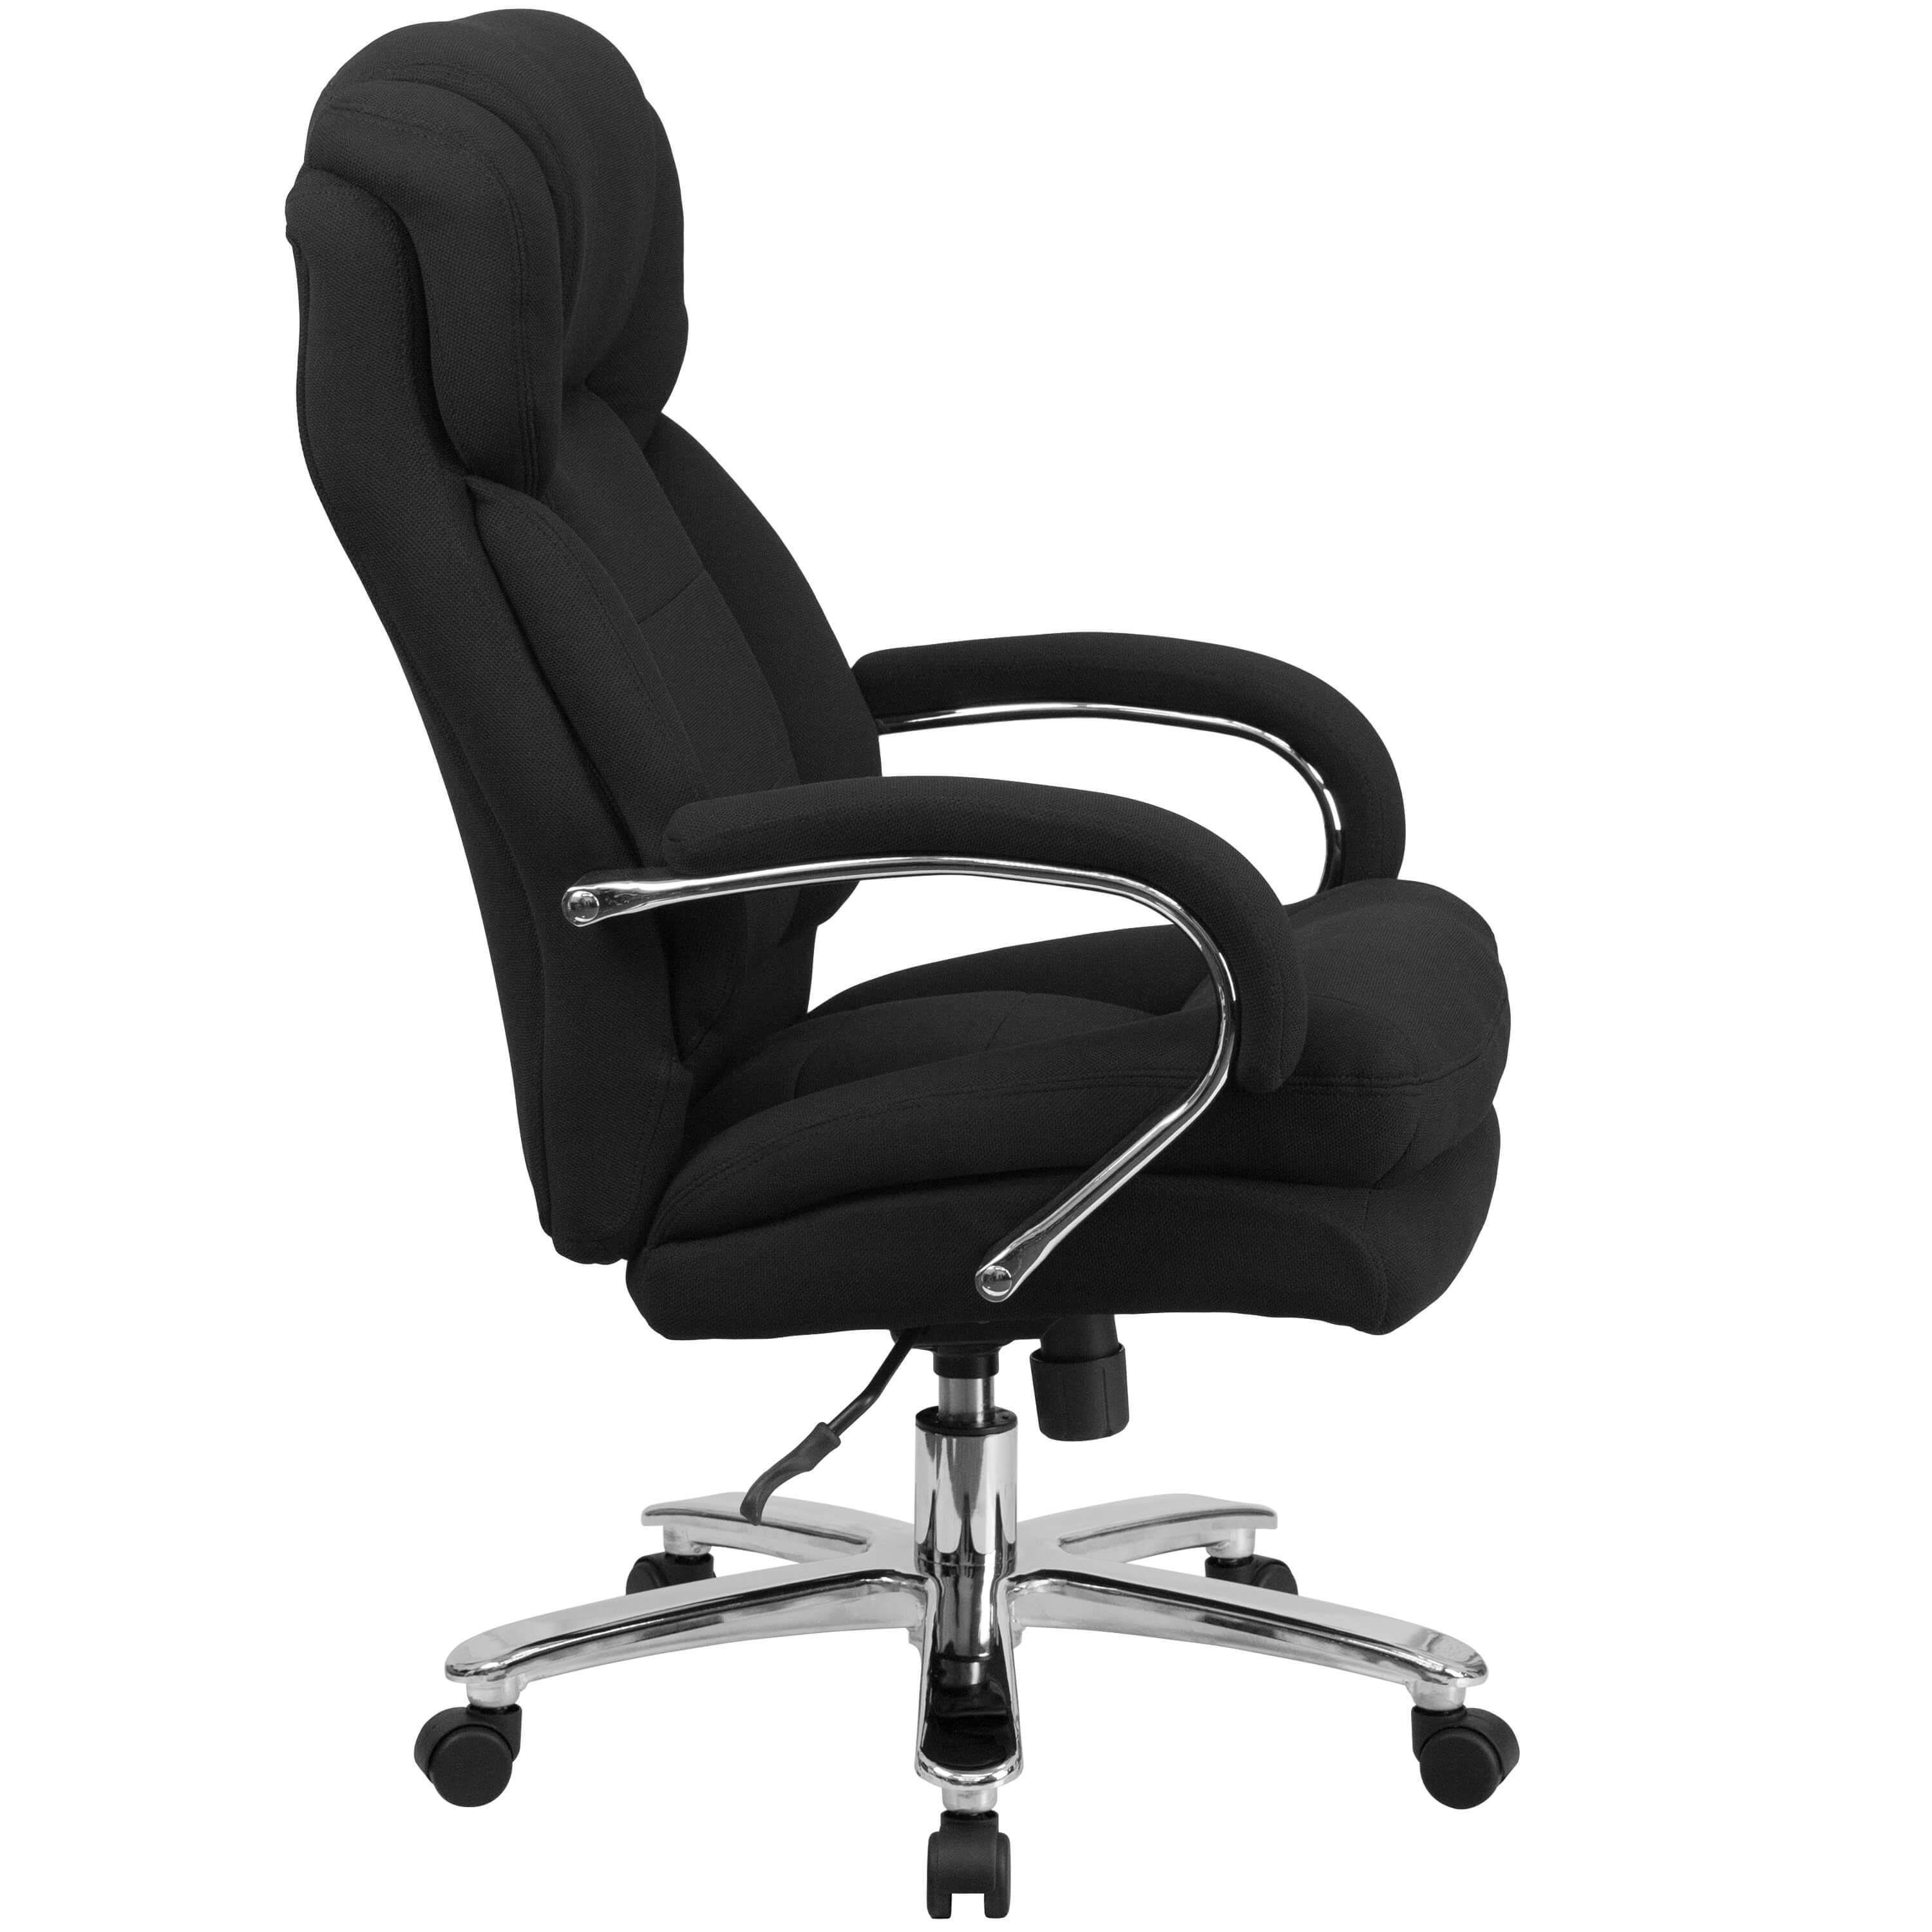 Heavy duty office chairs side view